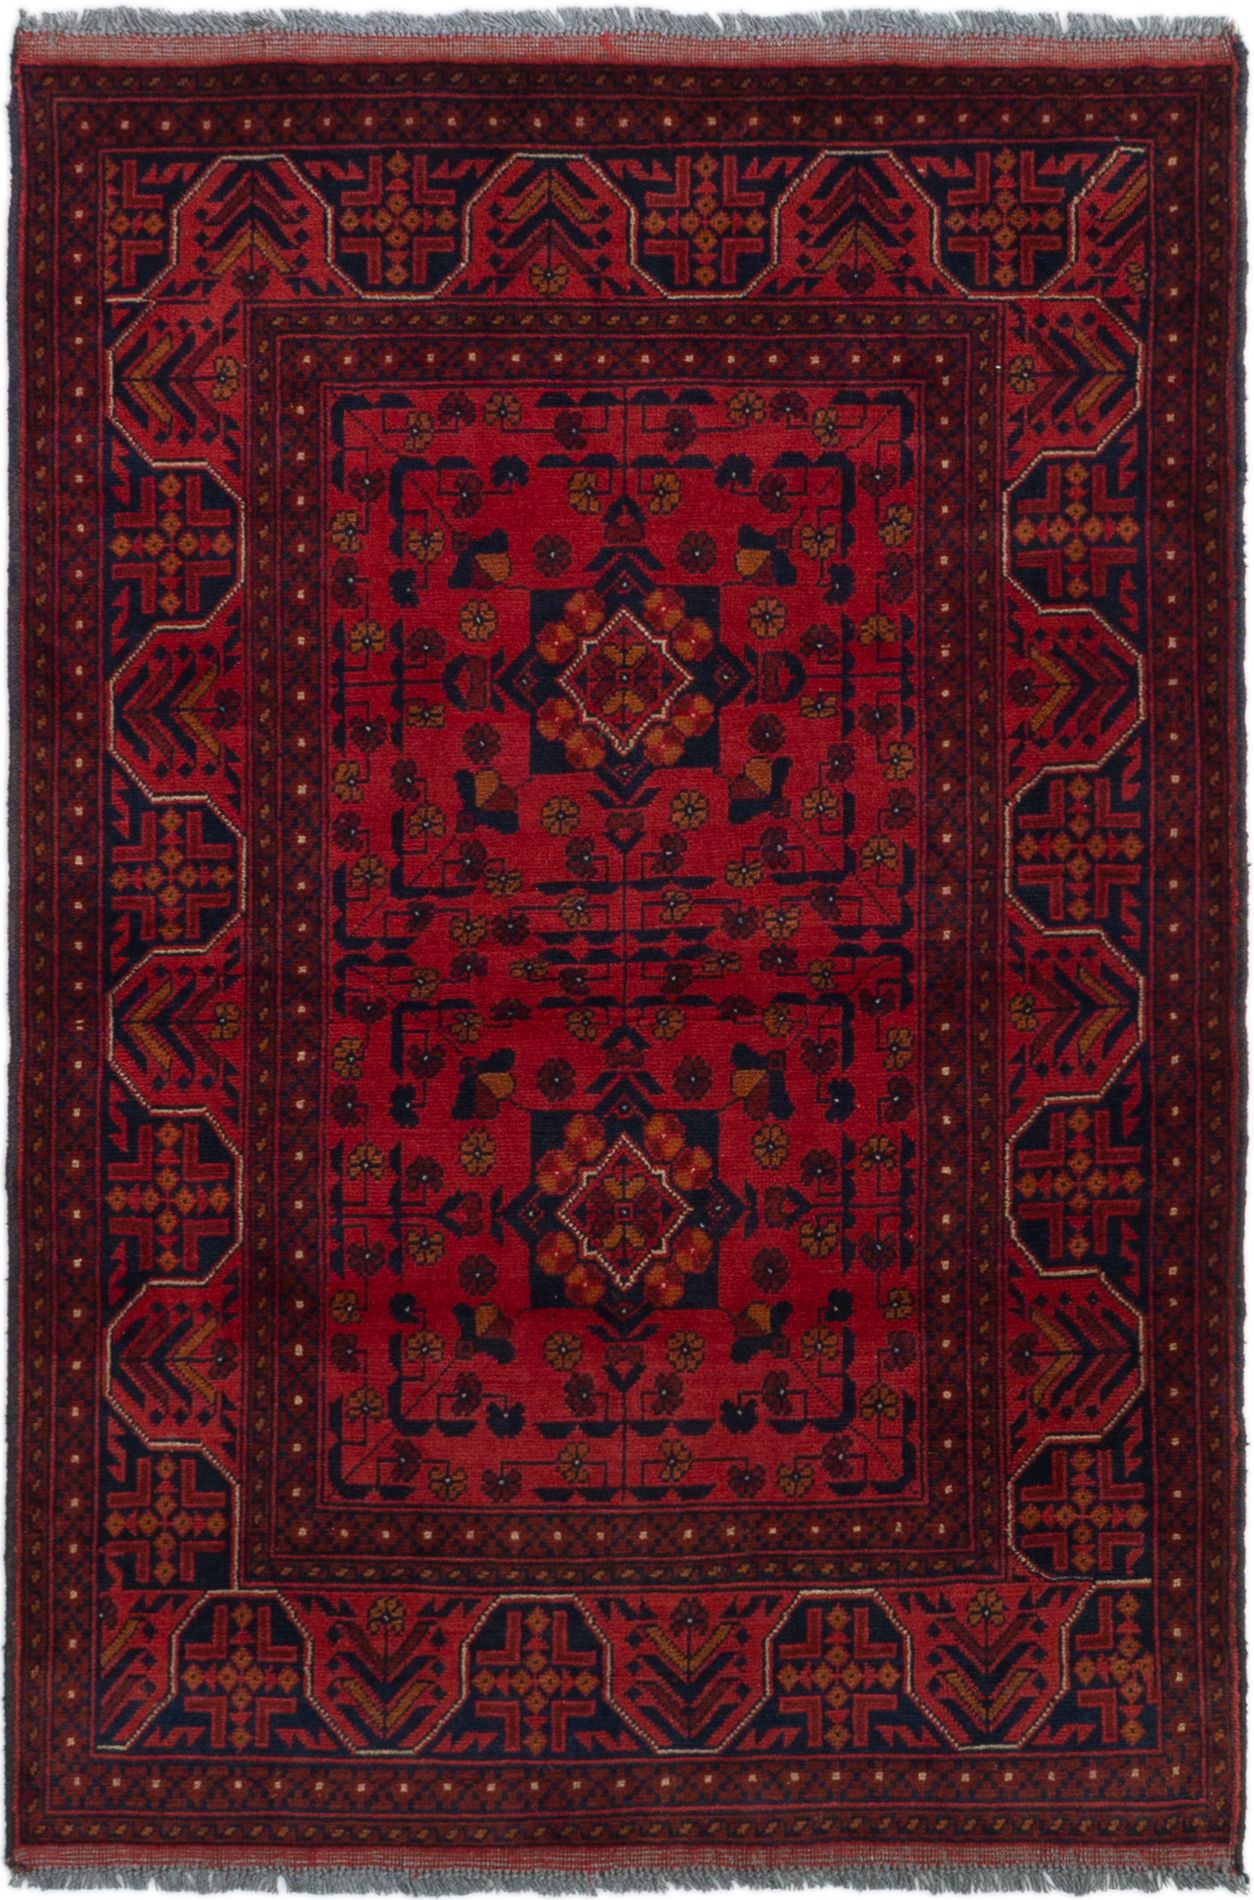 Hand-knotted Finest Khal Mohammadi Red Wool Rug 3'3" x 4'11" (36) Size: 3'3" x 4'11"  